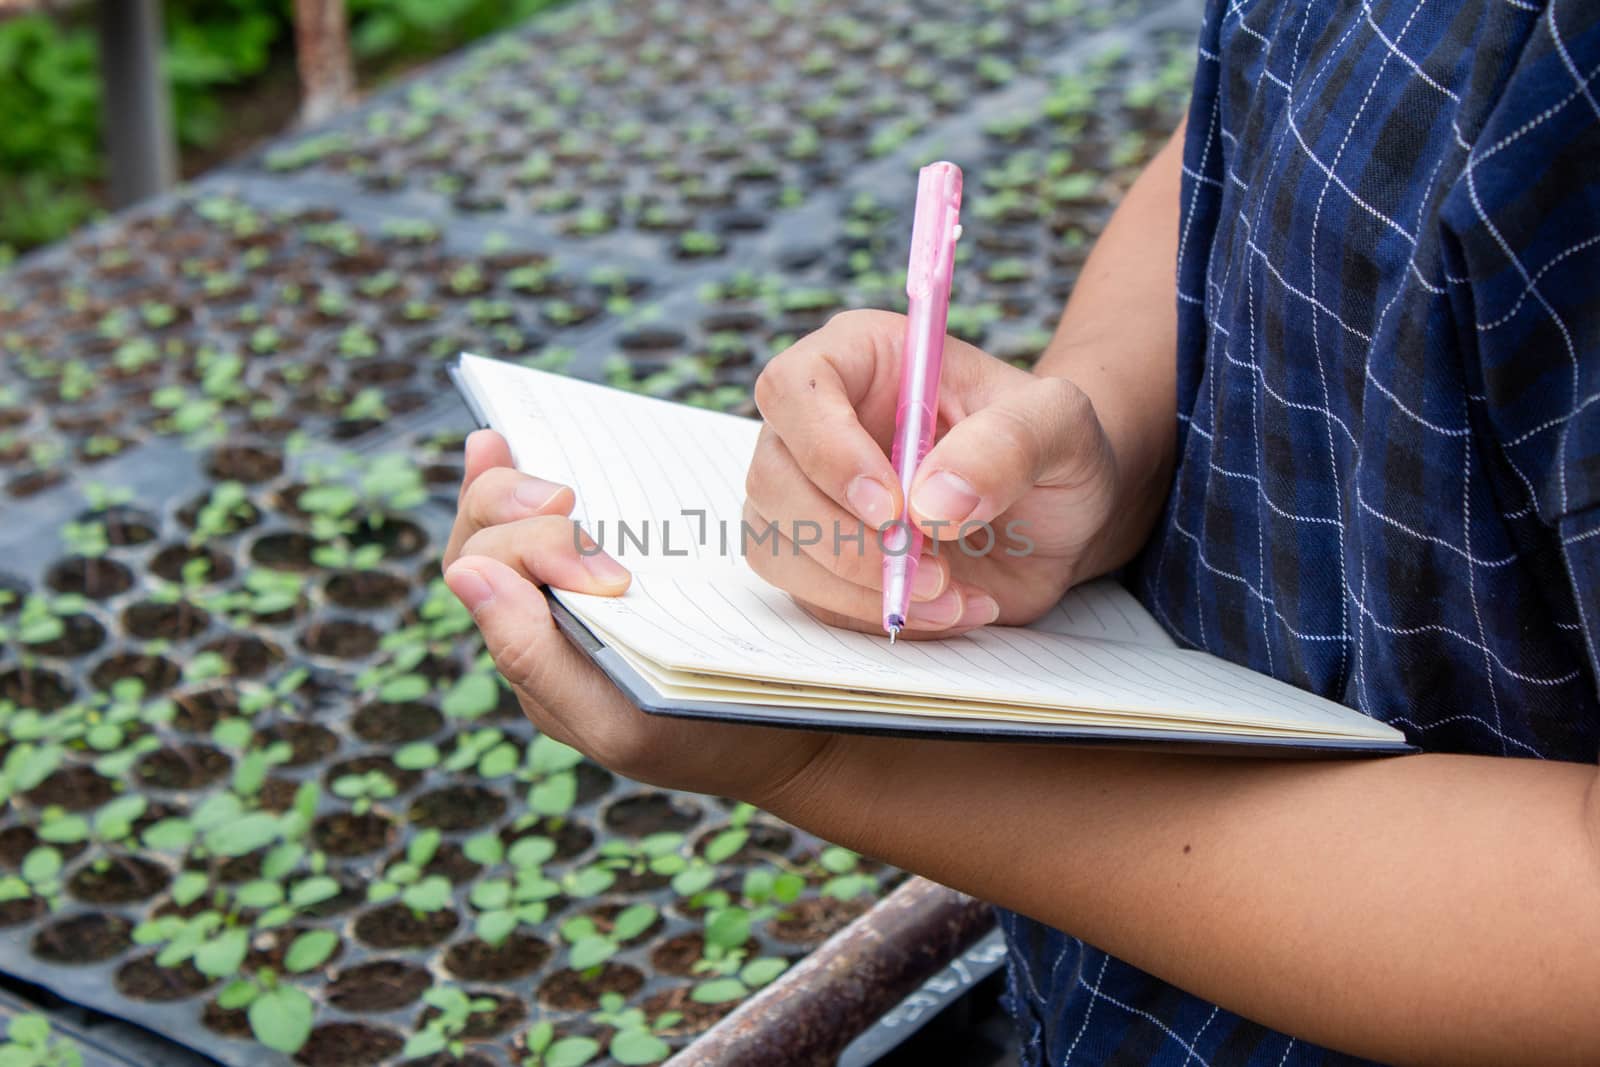 Portrait of a farmer Asian woman at work in greenhouse with notebook examines the growing seedlings on the farm and diseases in greenhouse. by TEERASAK